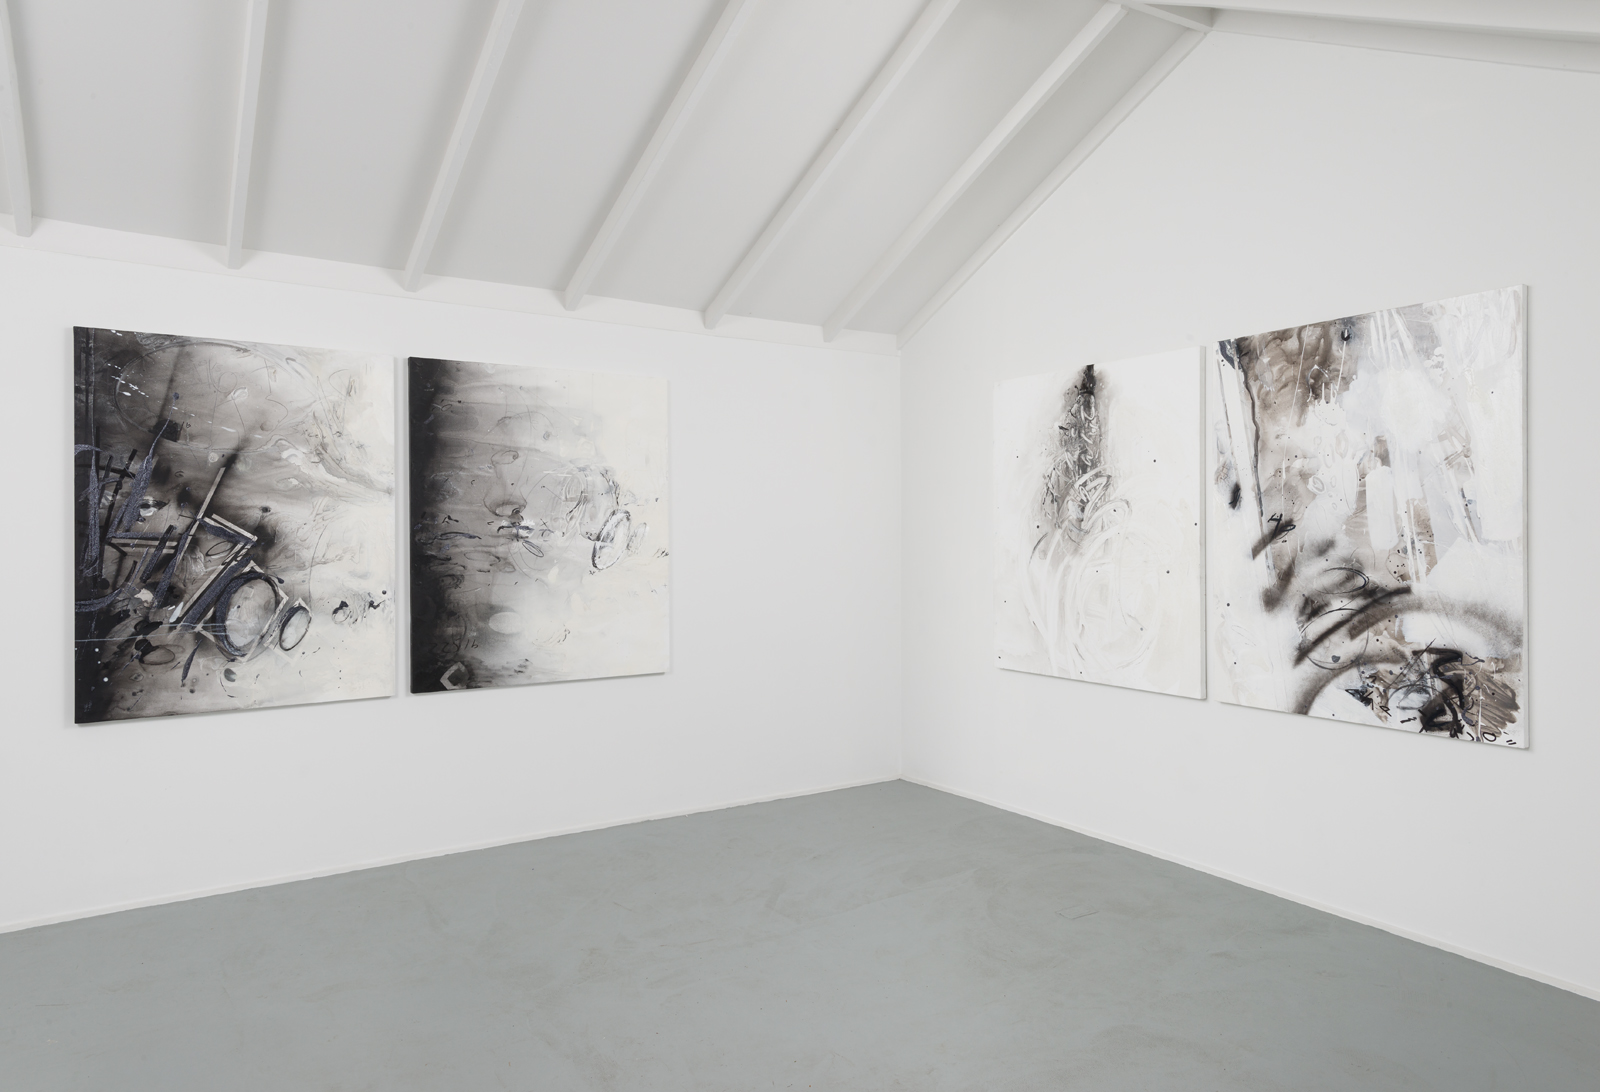  Installation view of "rank" exhibition, team (bungalow). 